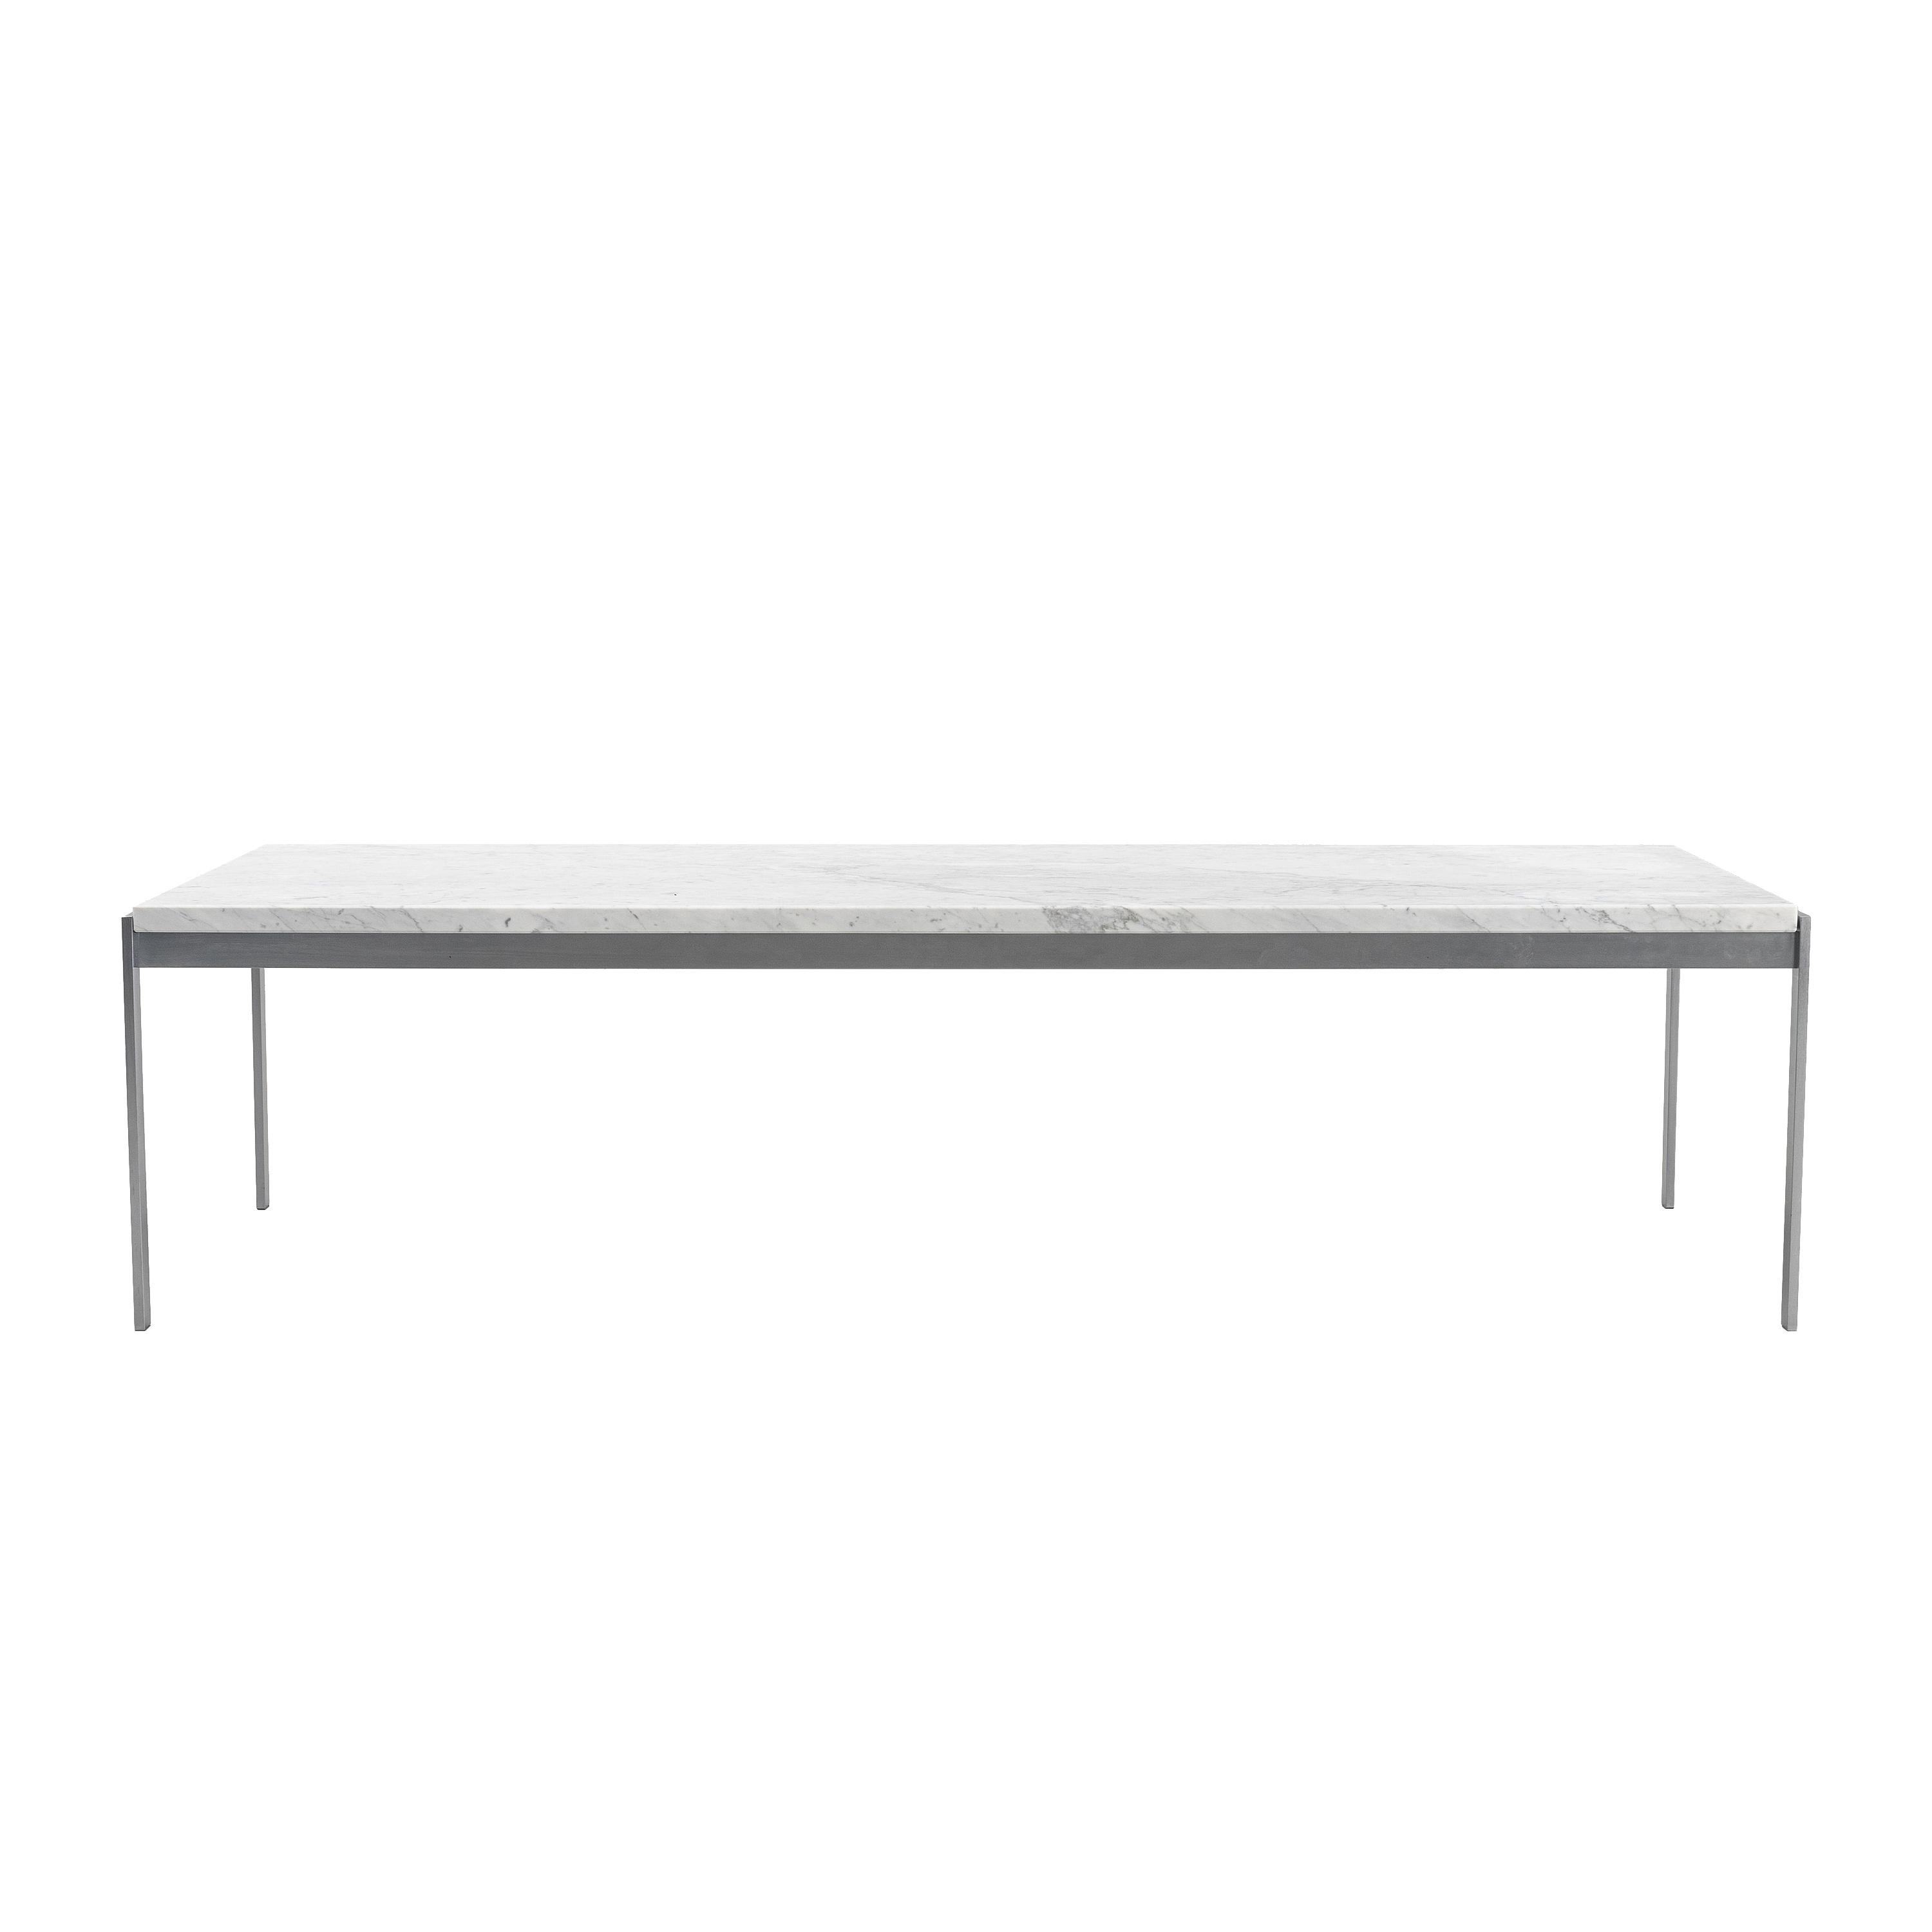 Poul Kjaerholm (1929-1980)

PK64

A rectangular PK64 coffee table with a white marble top on a four legged matte chrome-plated steel stand.
With a Fritz Hansen label. 
Produced by Fritz Hansen, Denmark.
1995

Literature
The Furniture of Poul